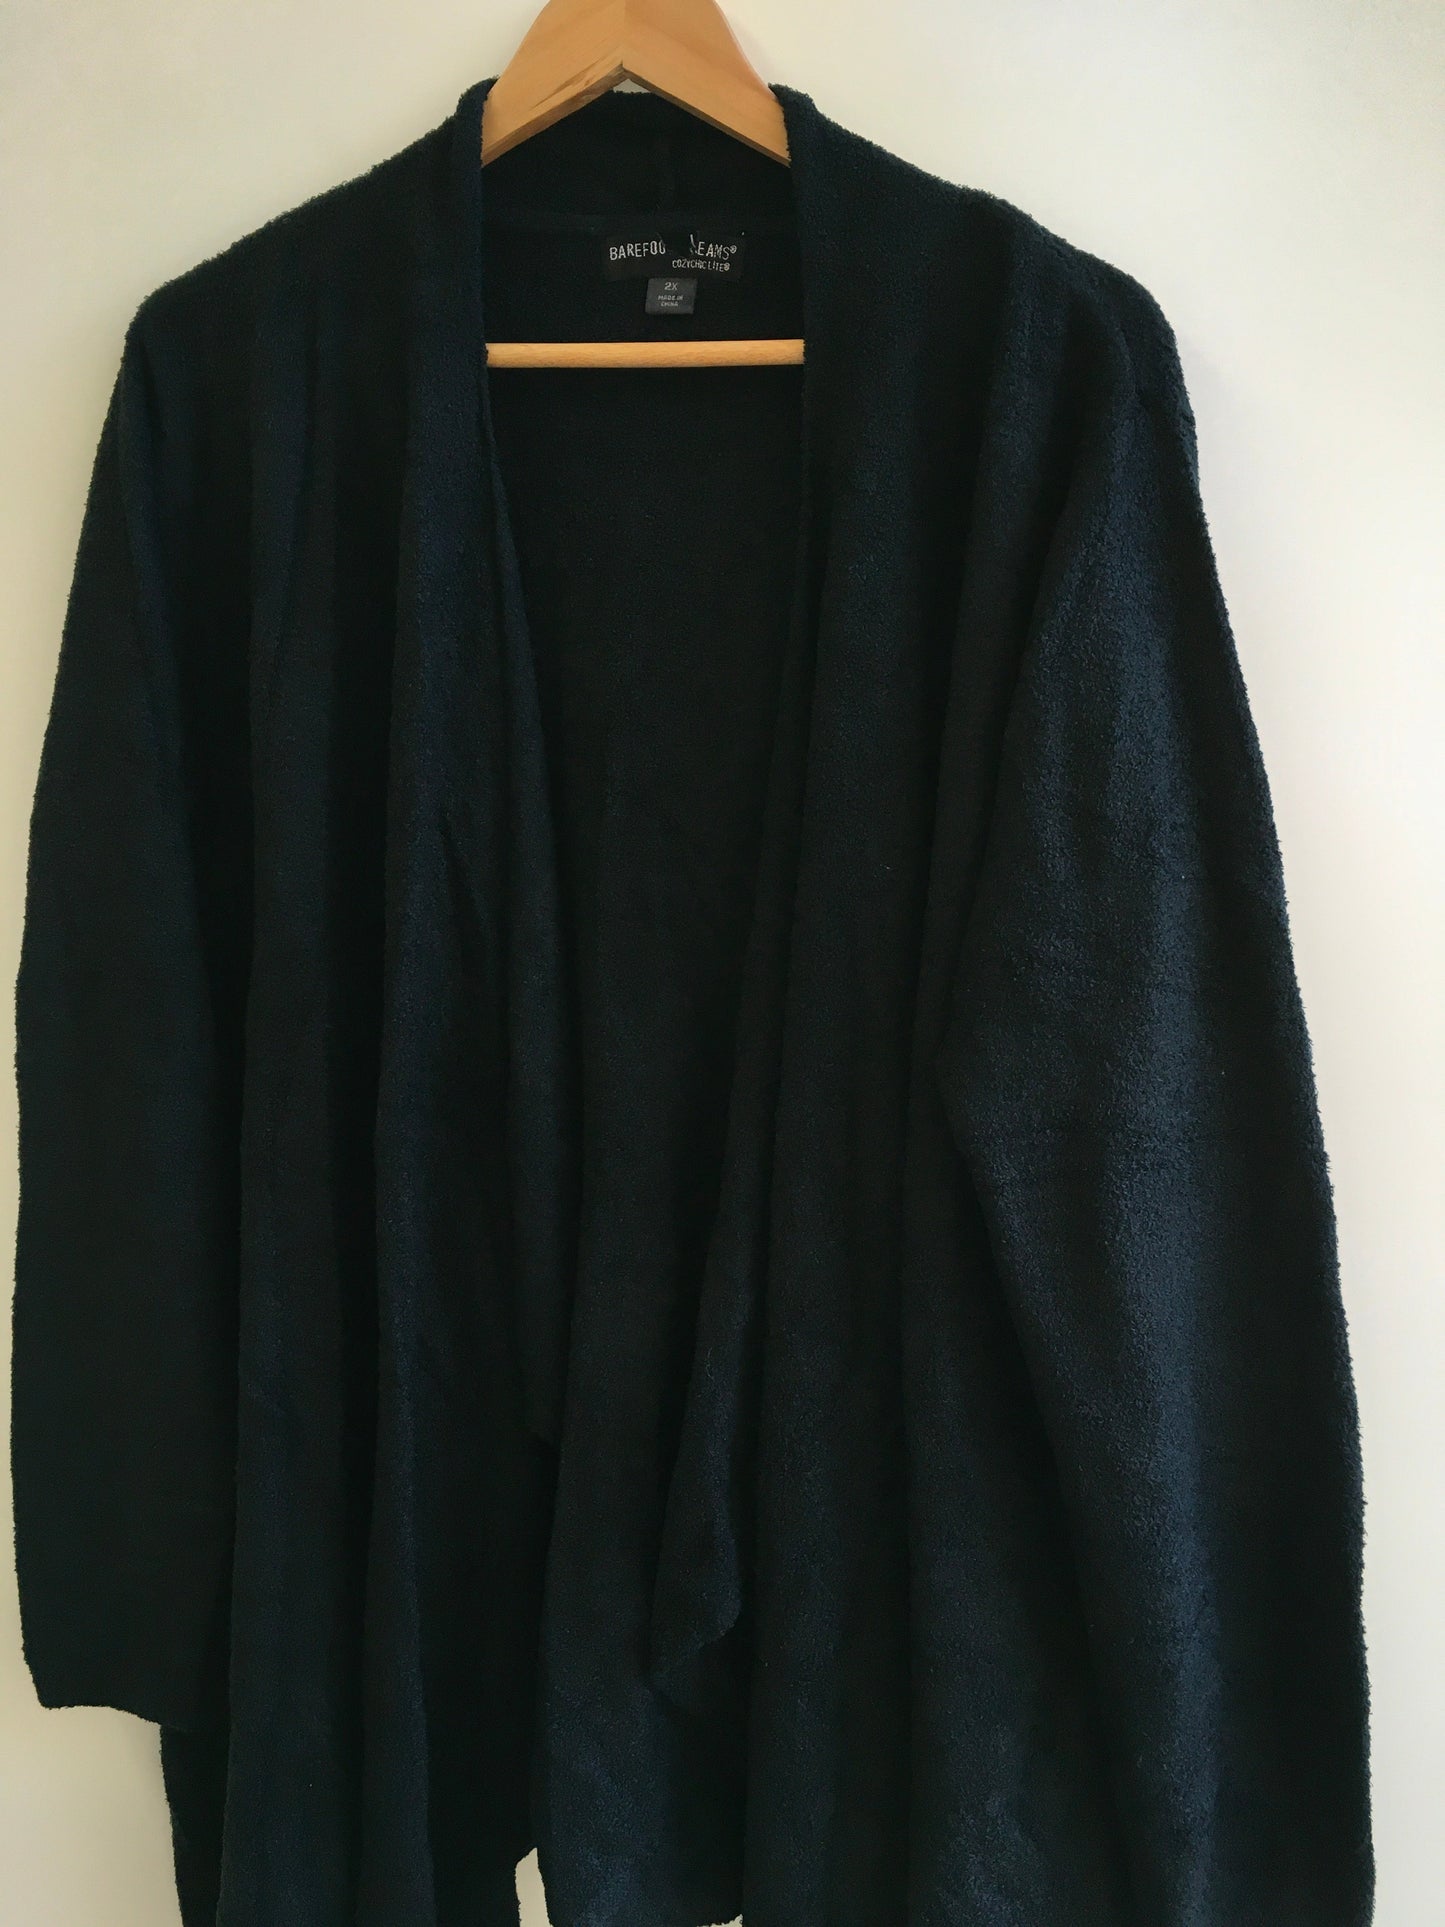 Sweater Cardigan By Barefoot Dreams  Size: 2x